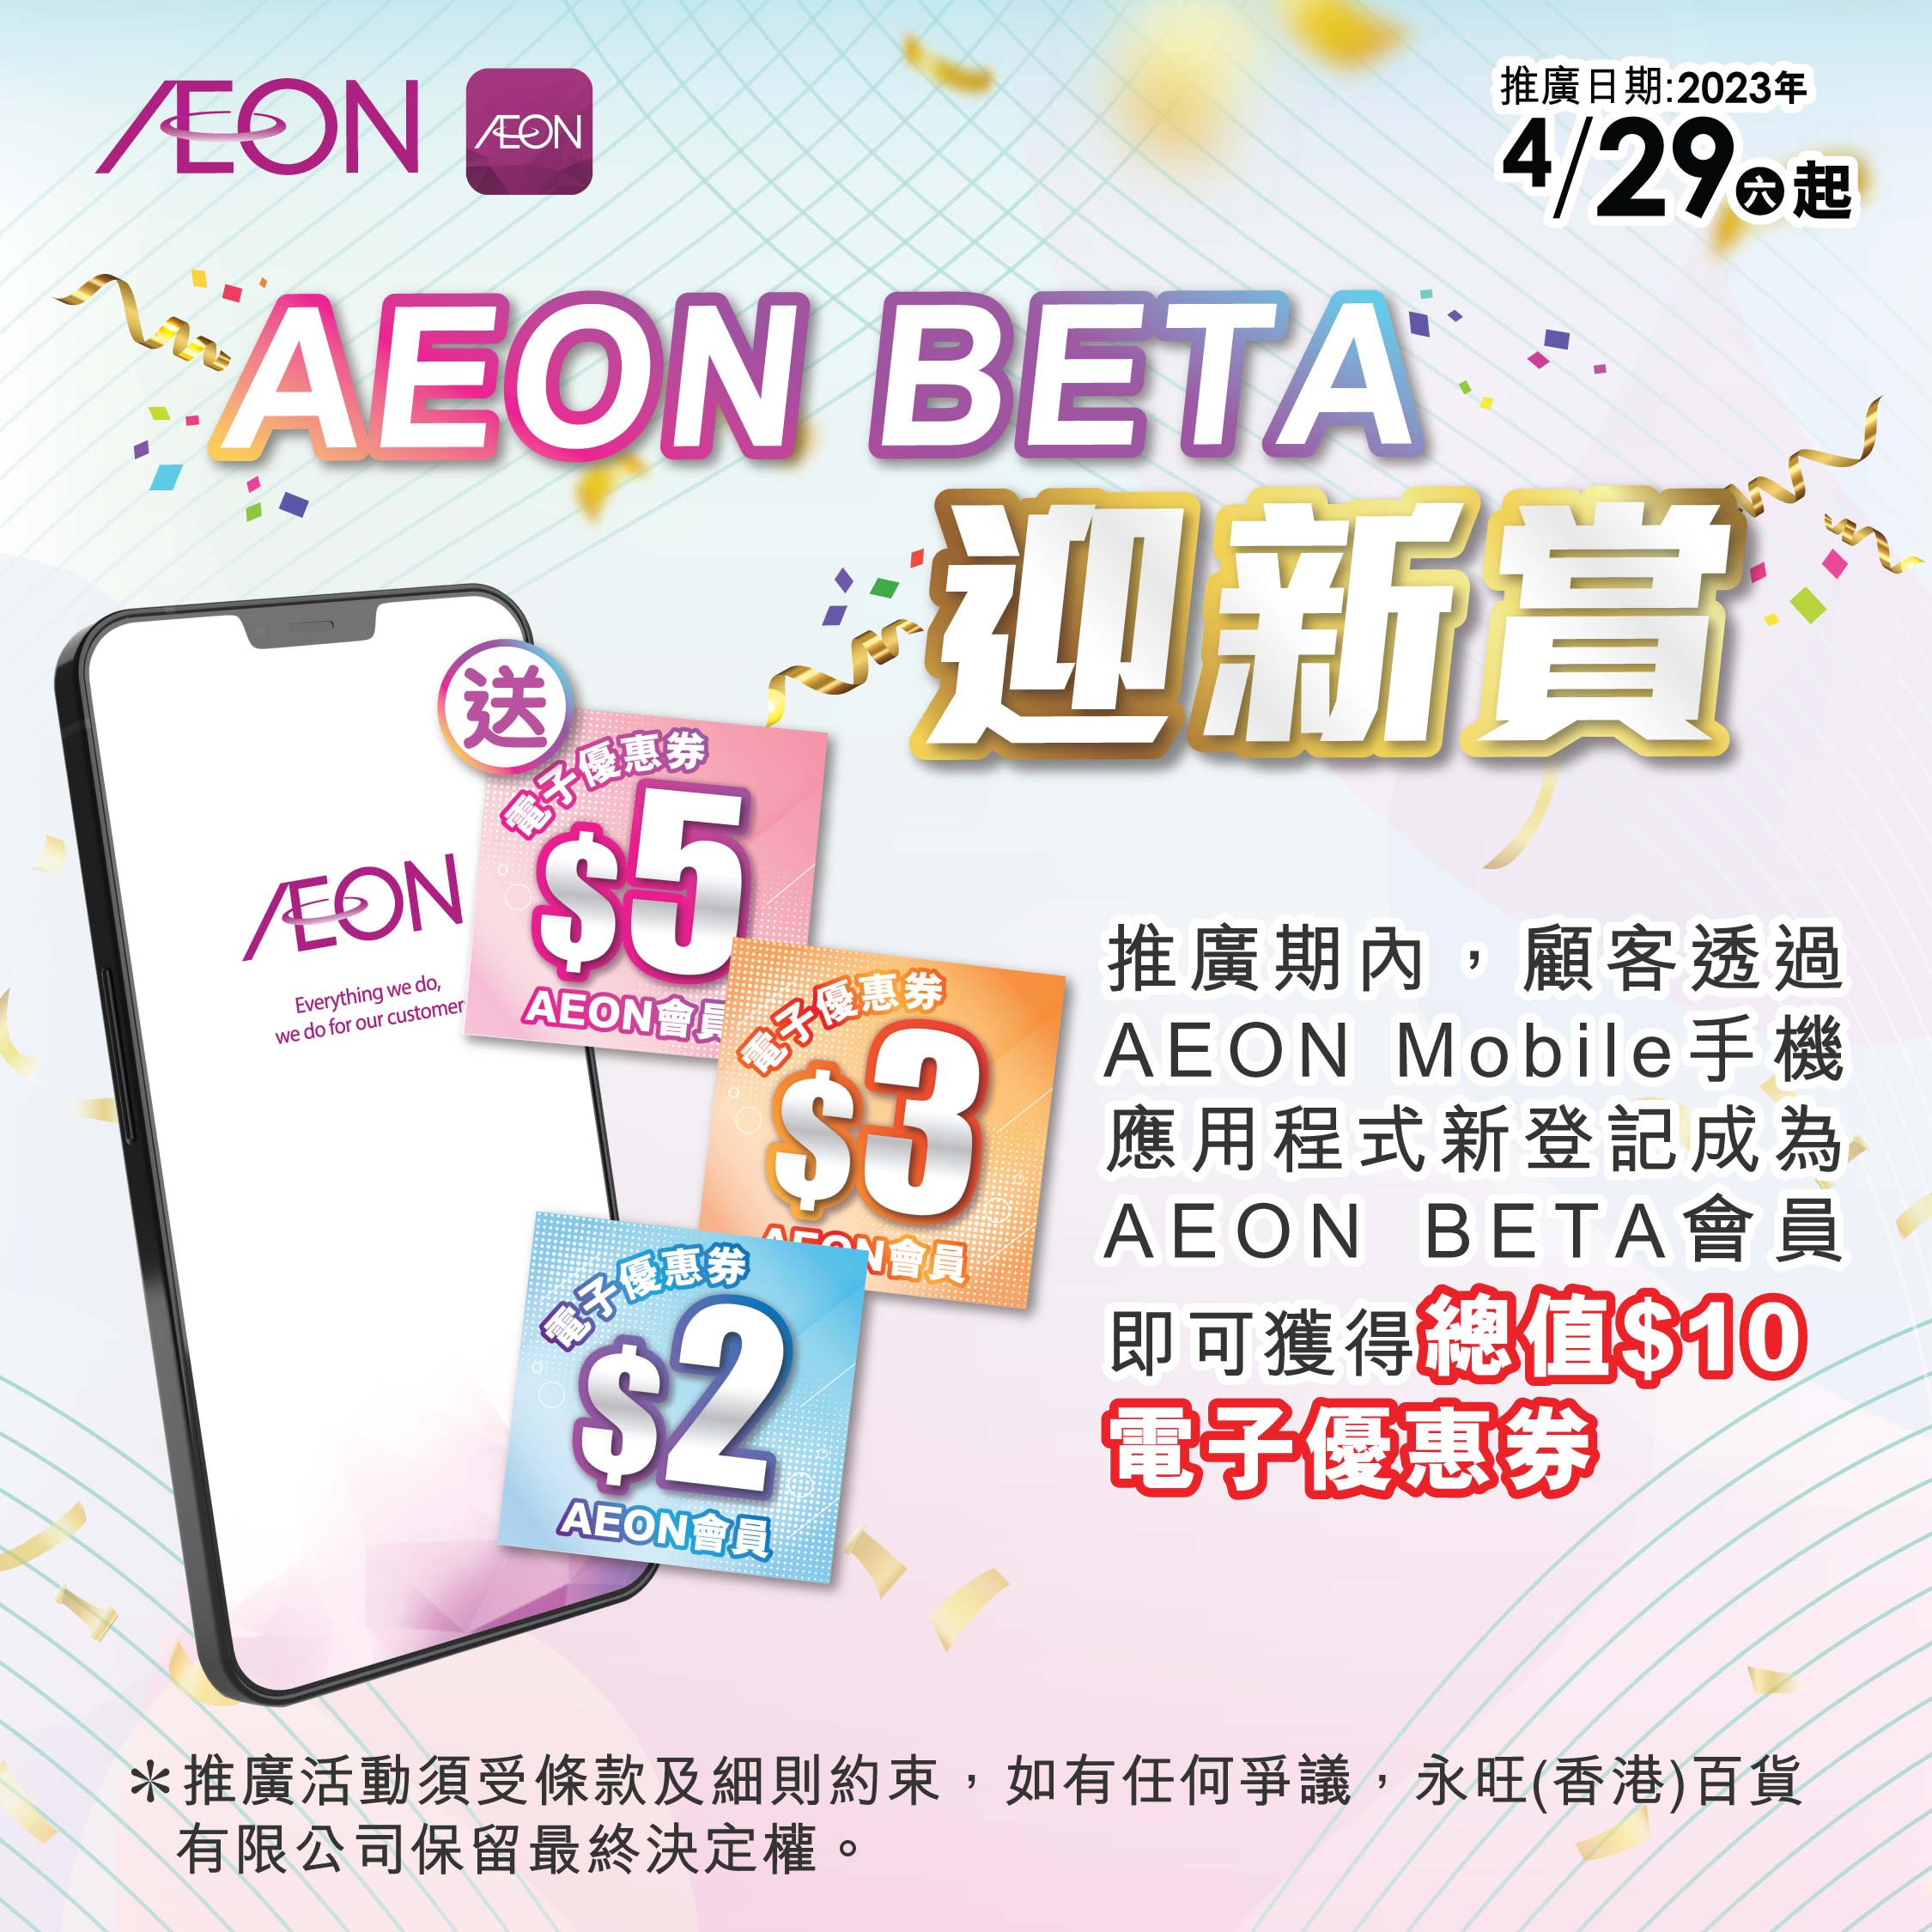 AEON BETA welcome offer